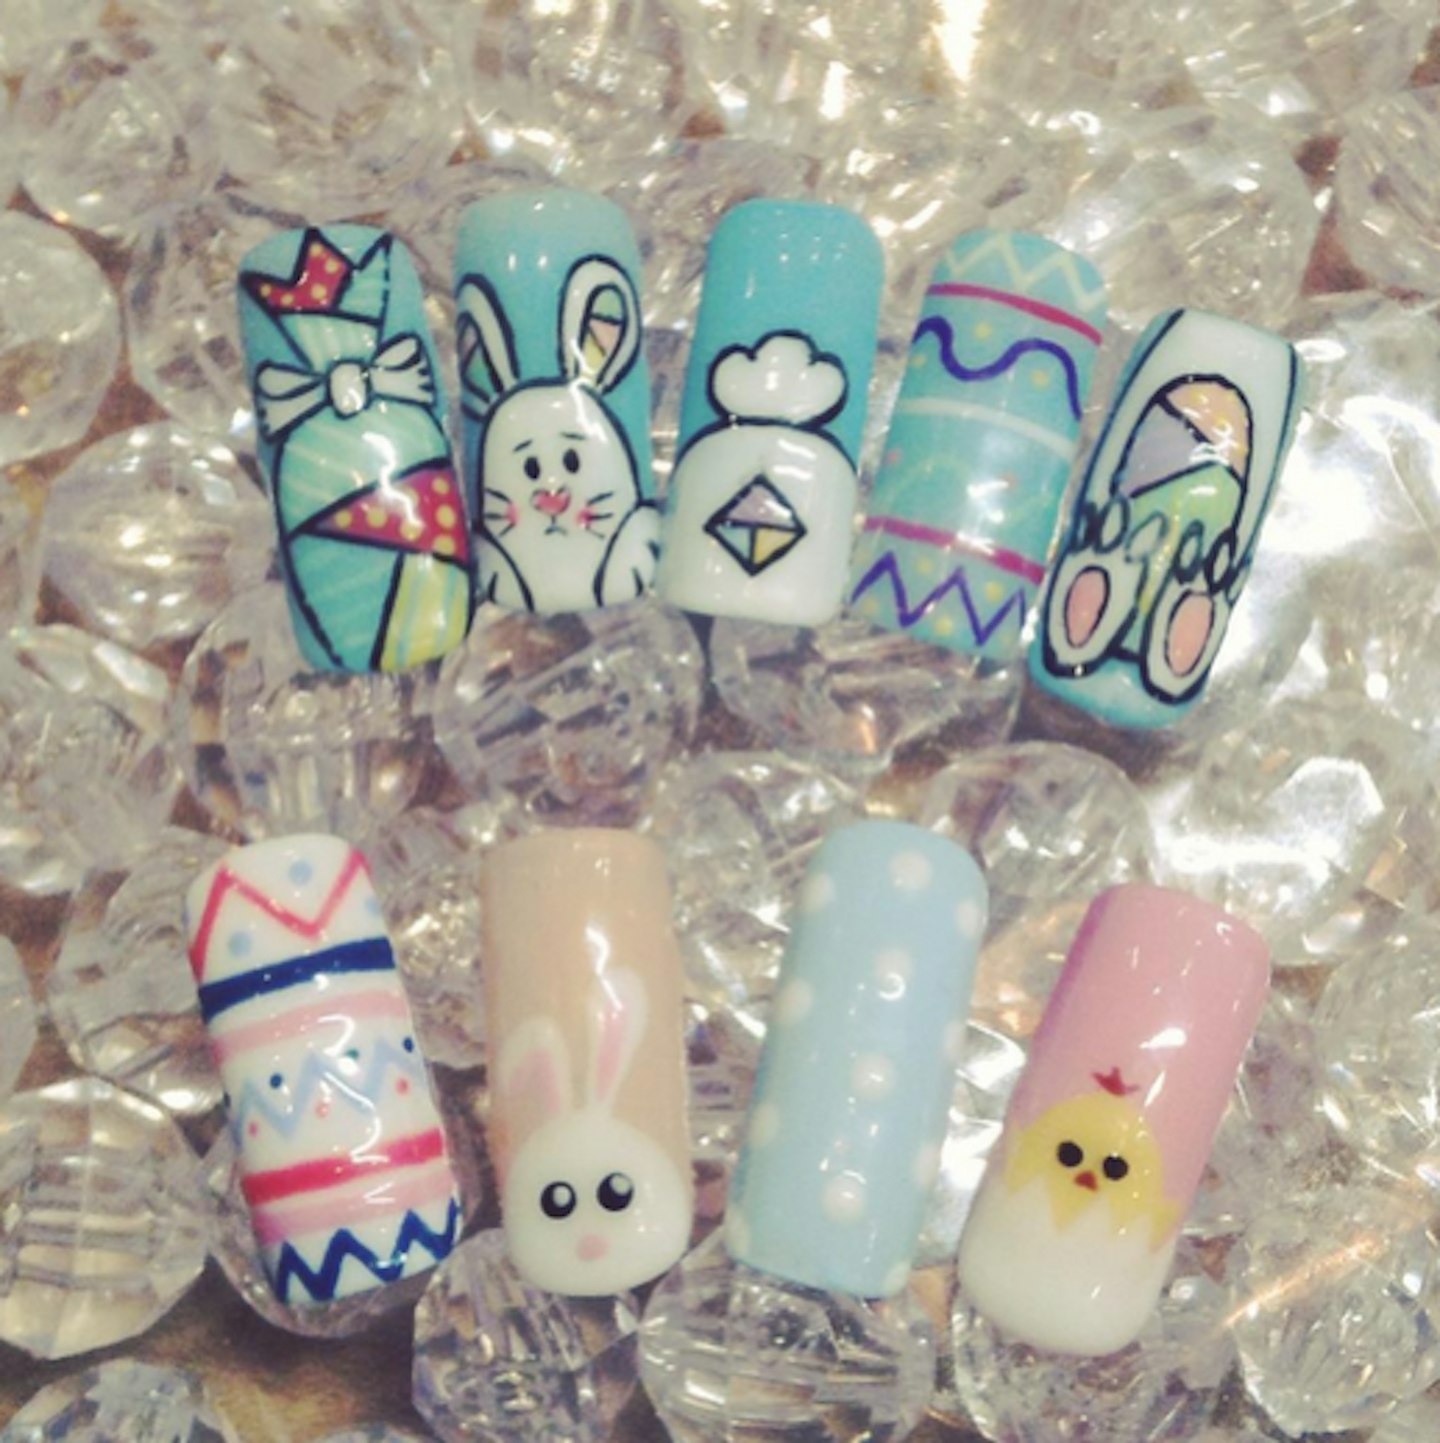 easter nails designs manicure